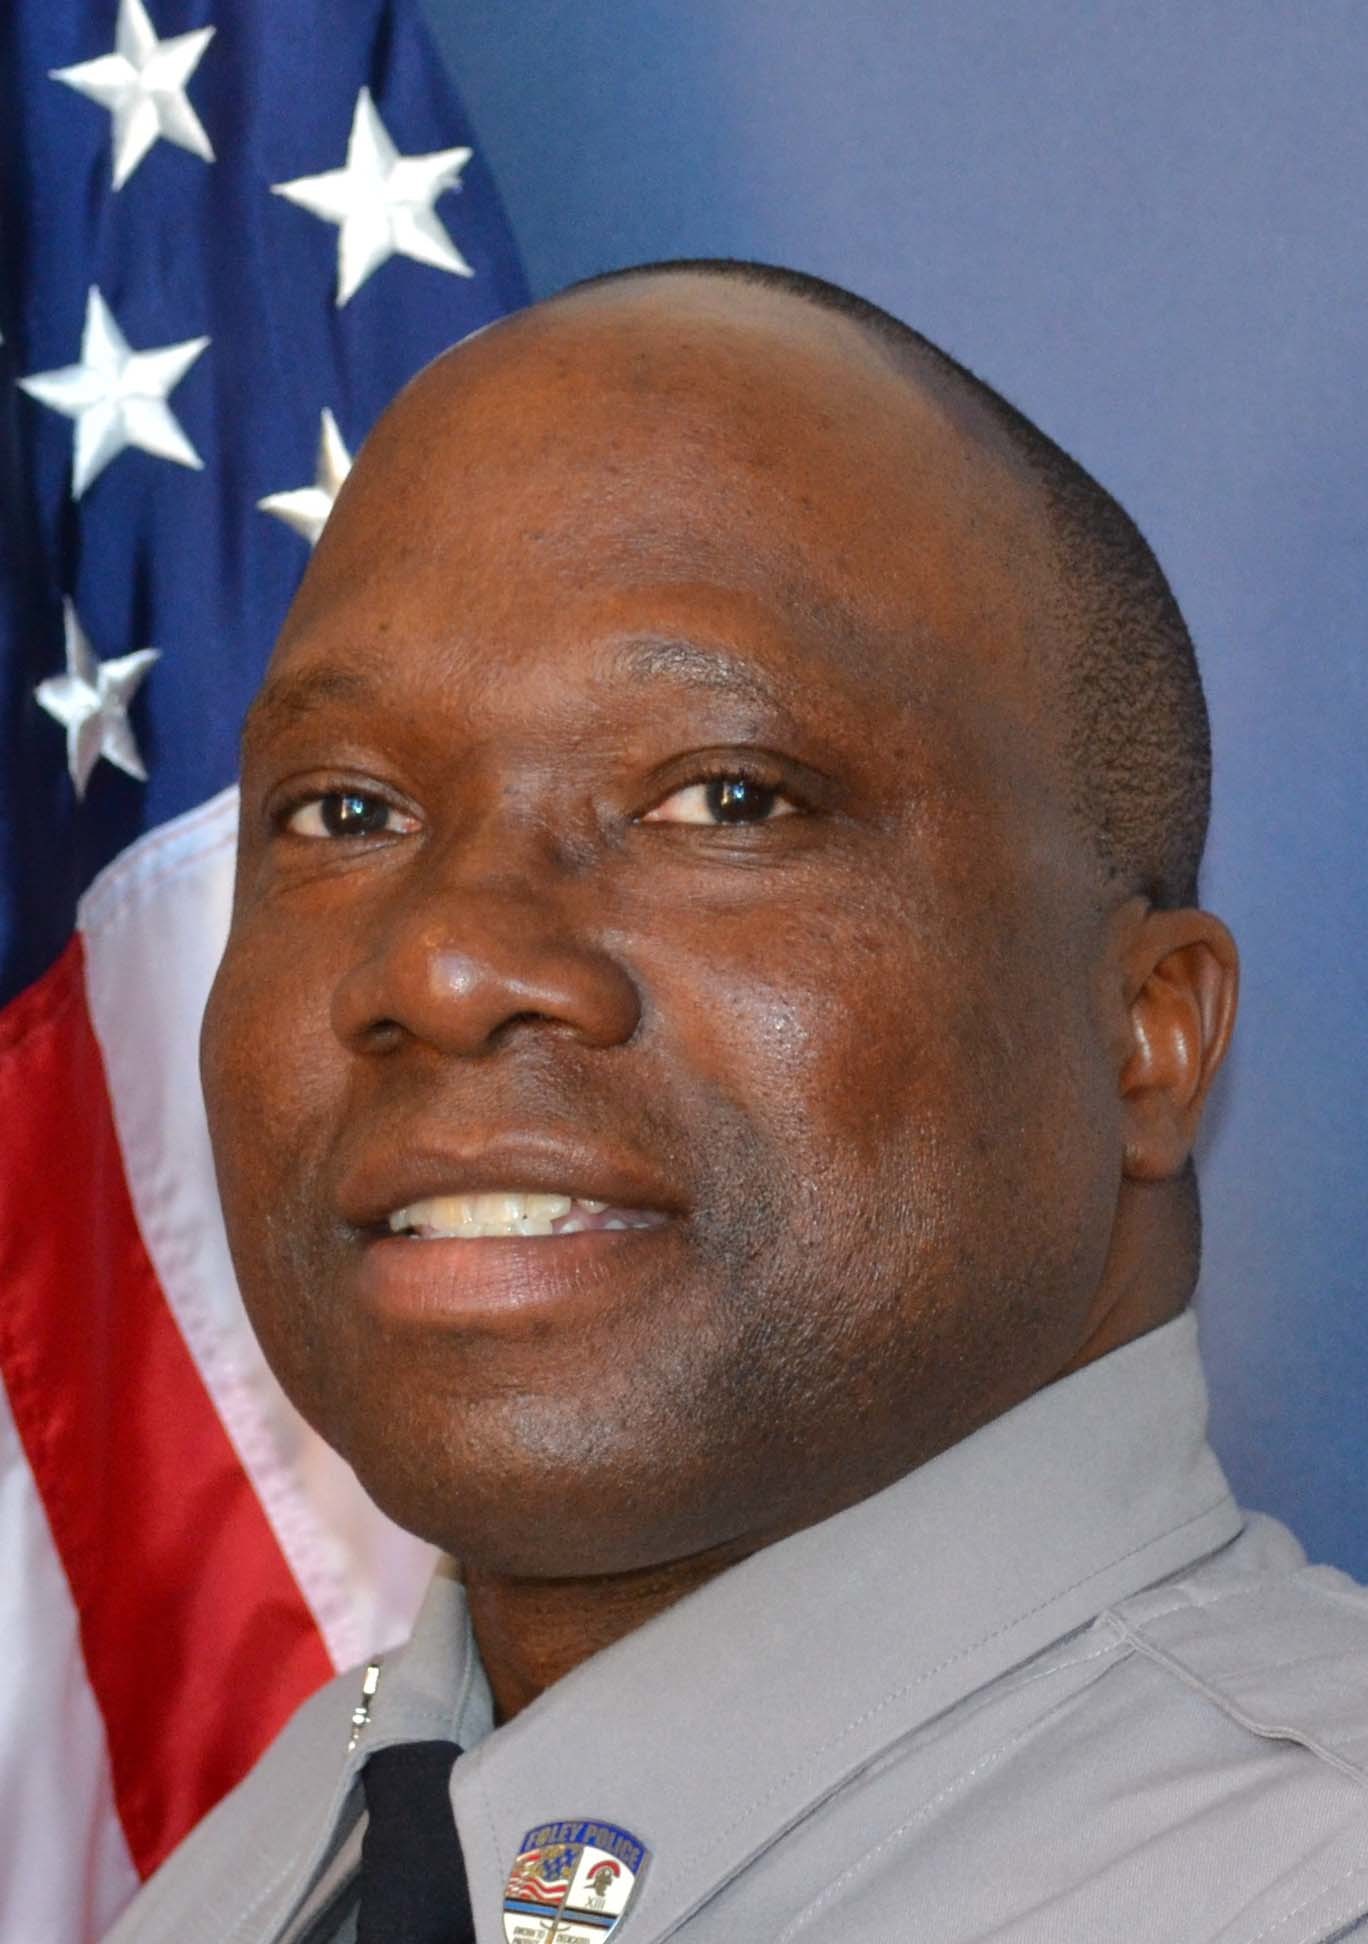 SRO Labon Williams has been selected as Officer of the Year for 2007.